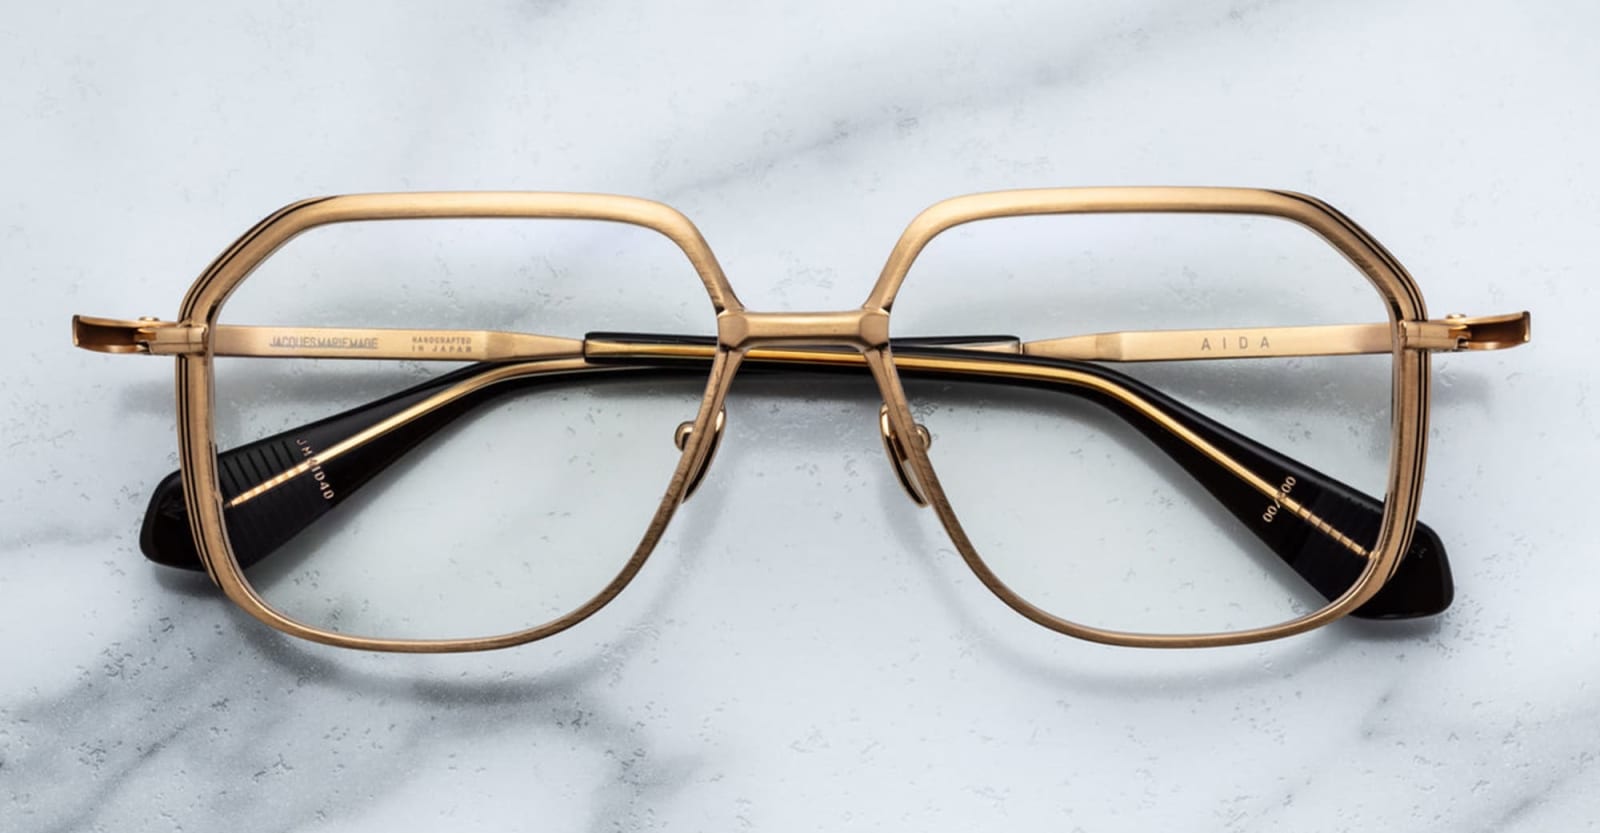 Jacques Marie Mage Aida - Gold Rx Glasses